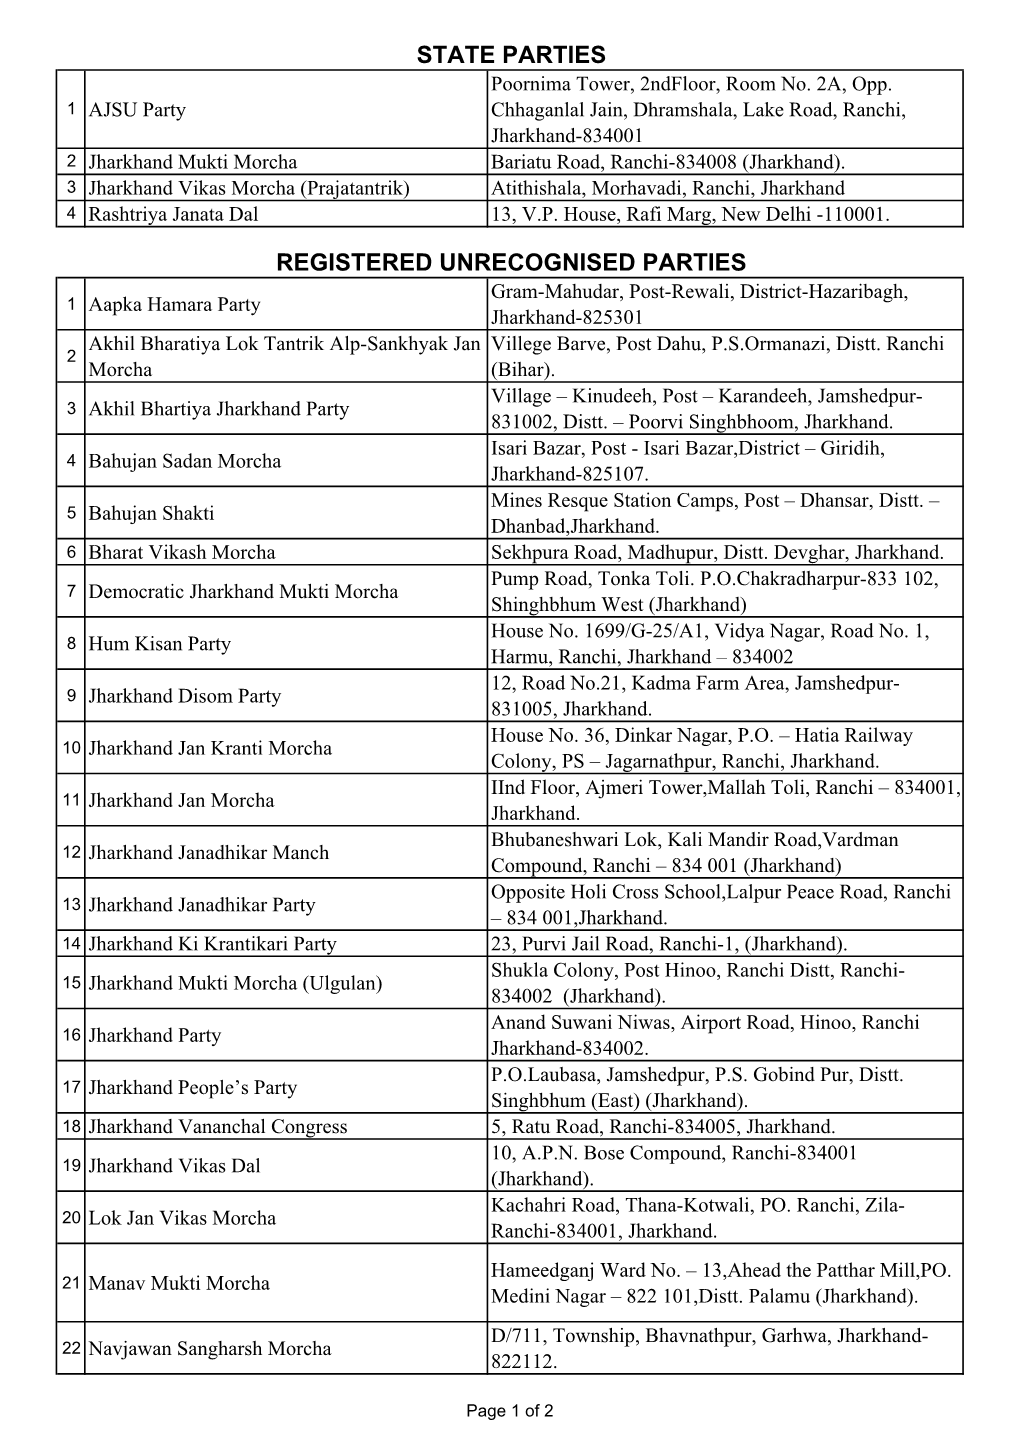 List of Party